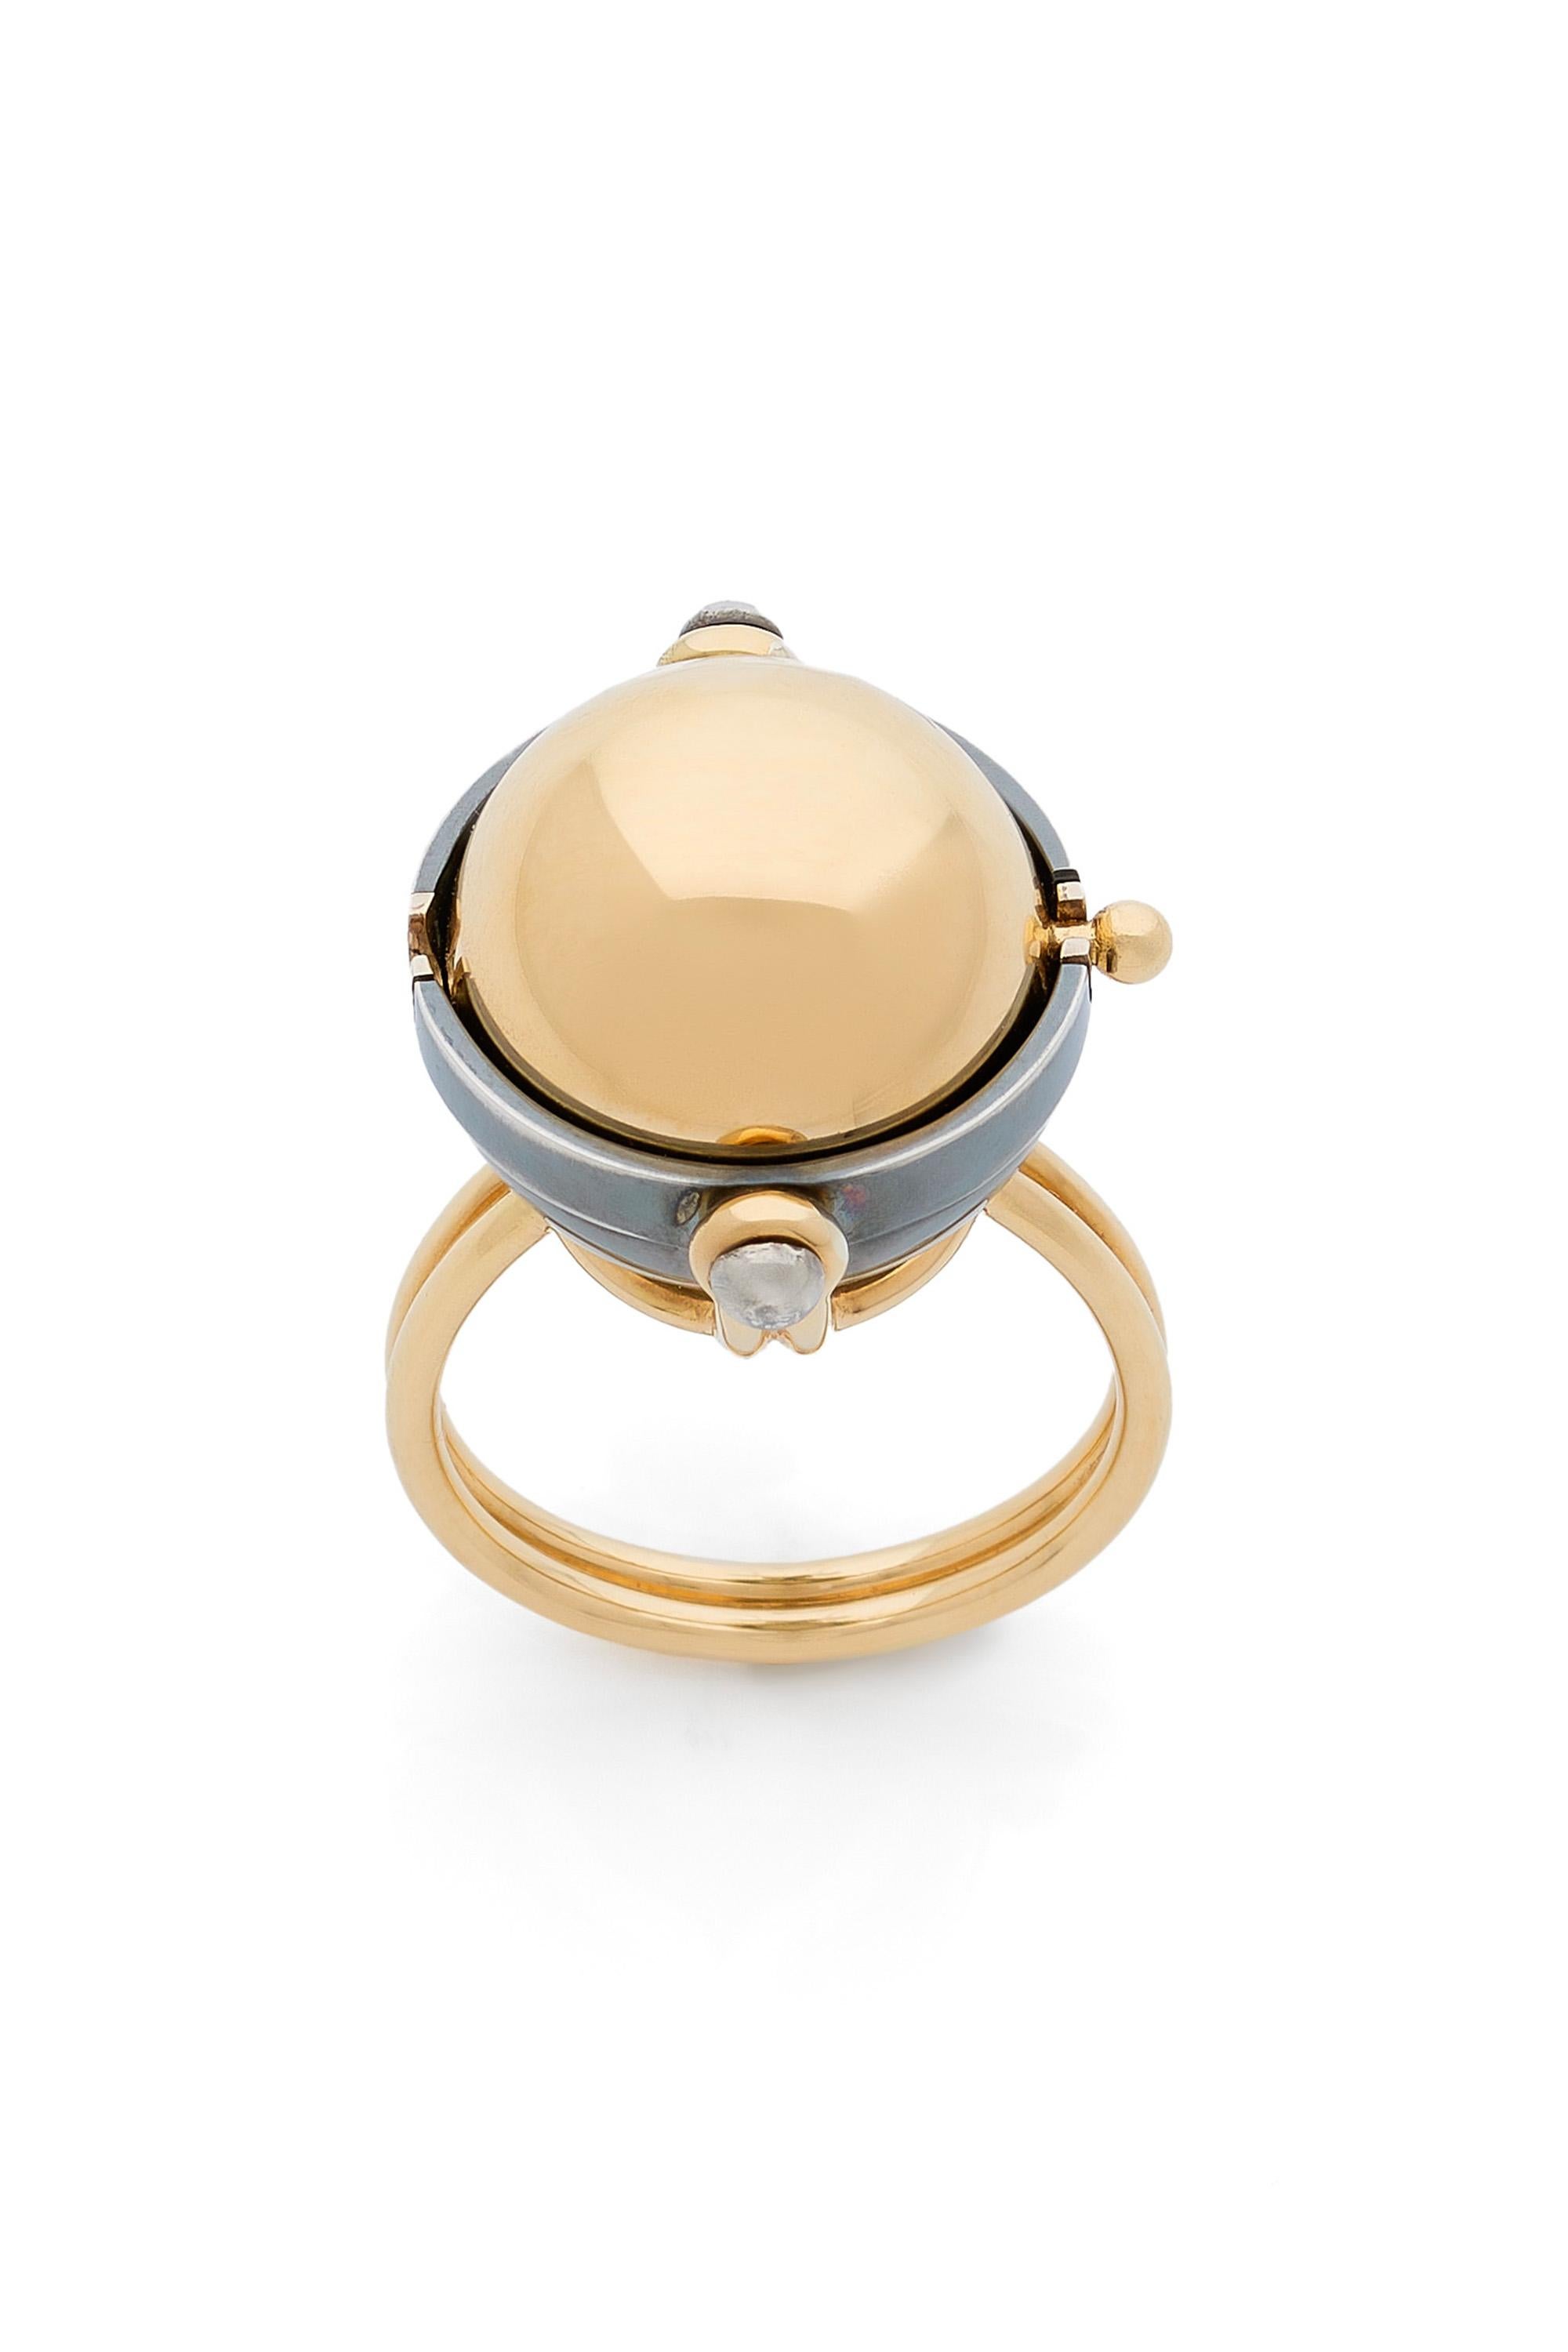 Neoclassical Diamond Sphere Ring Akoya Pearl in 18k Gold by Elie Top  For Sale